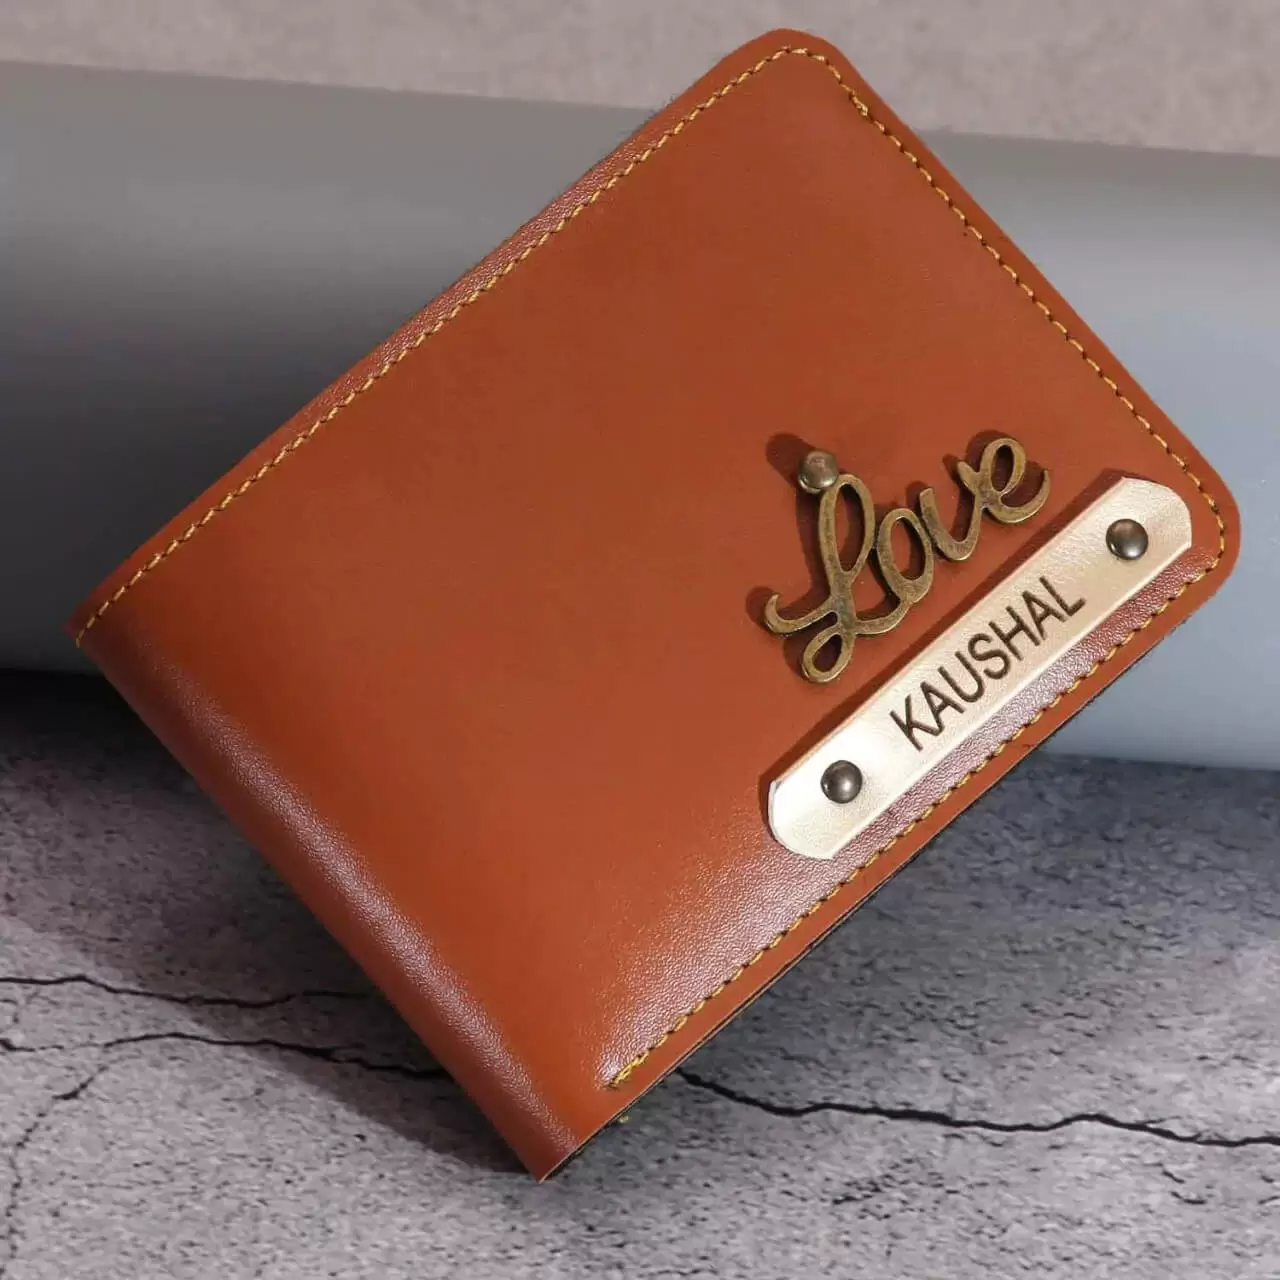 Leather Name Wallet